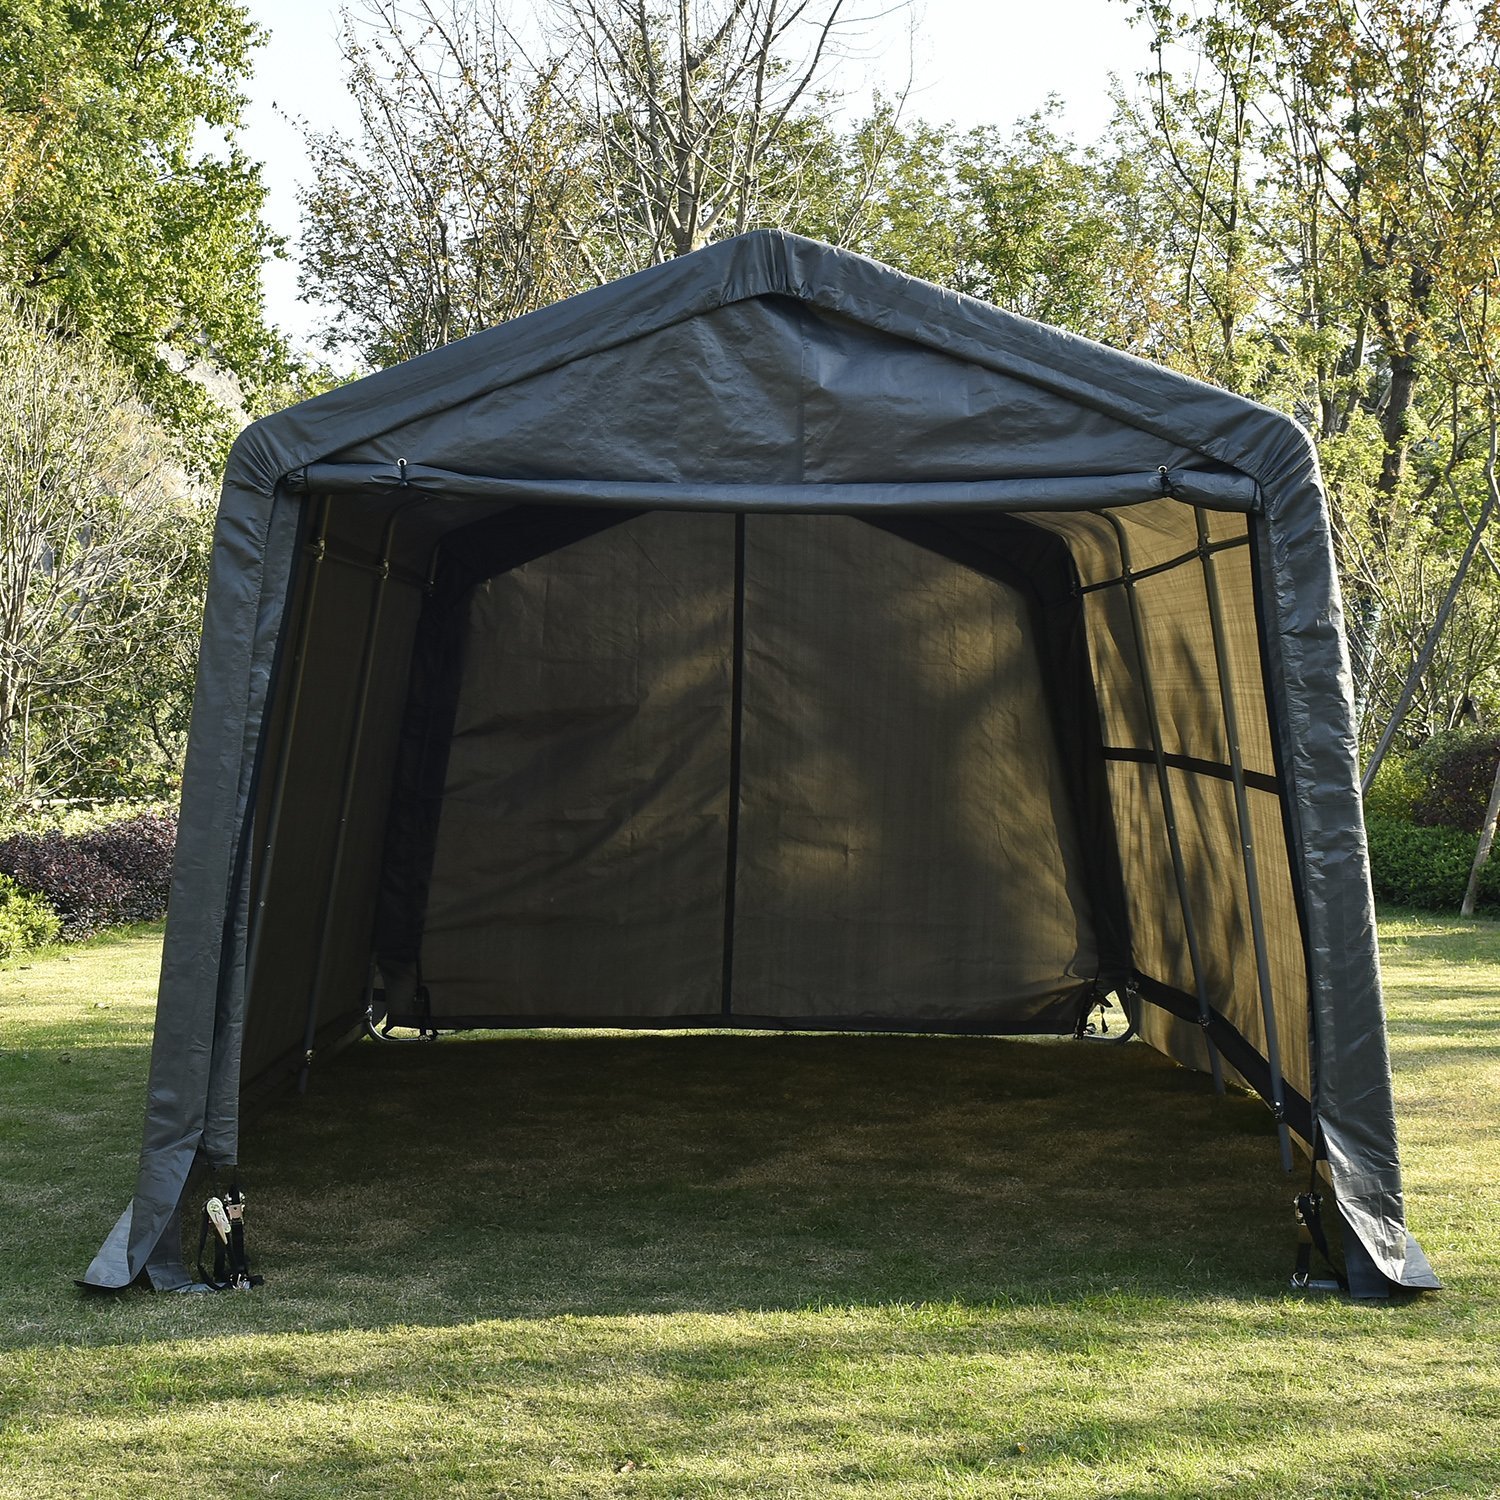 Top 10 Best Car Shelters in 2021 - TopReviewProducts